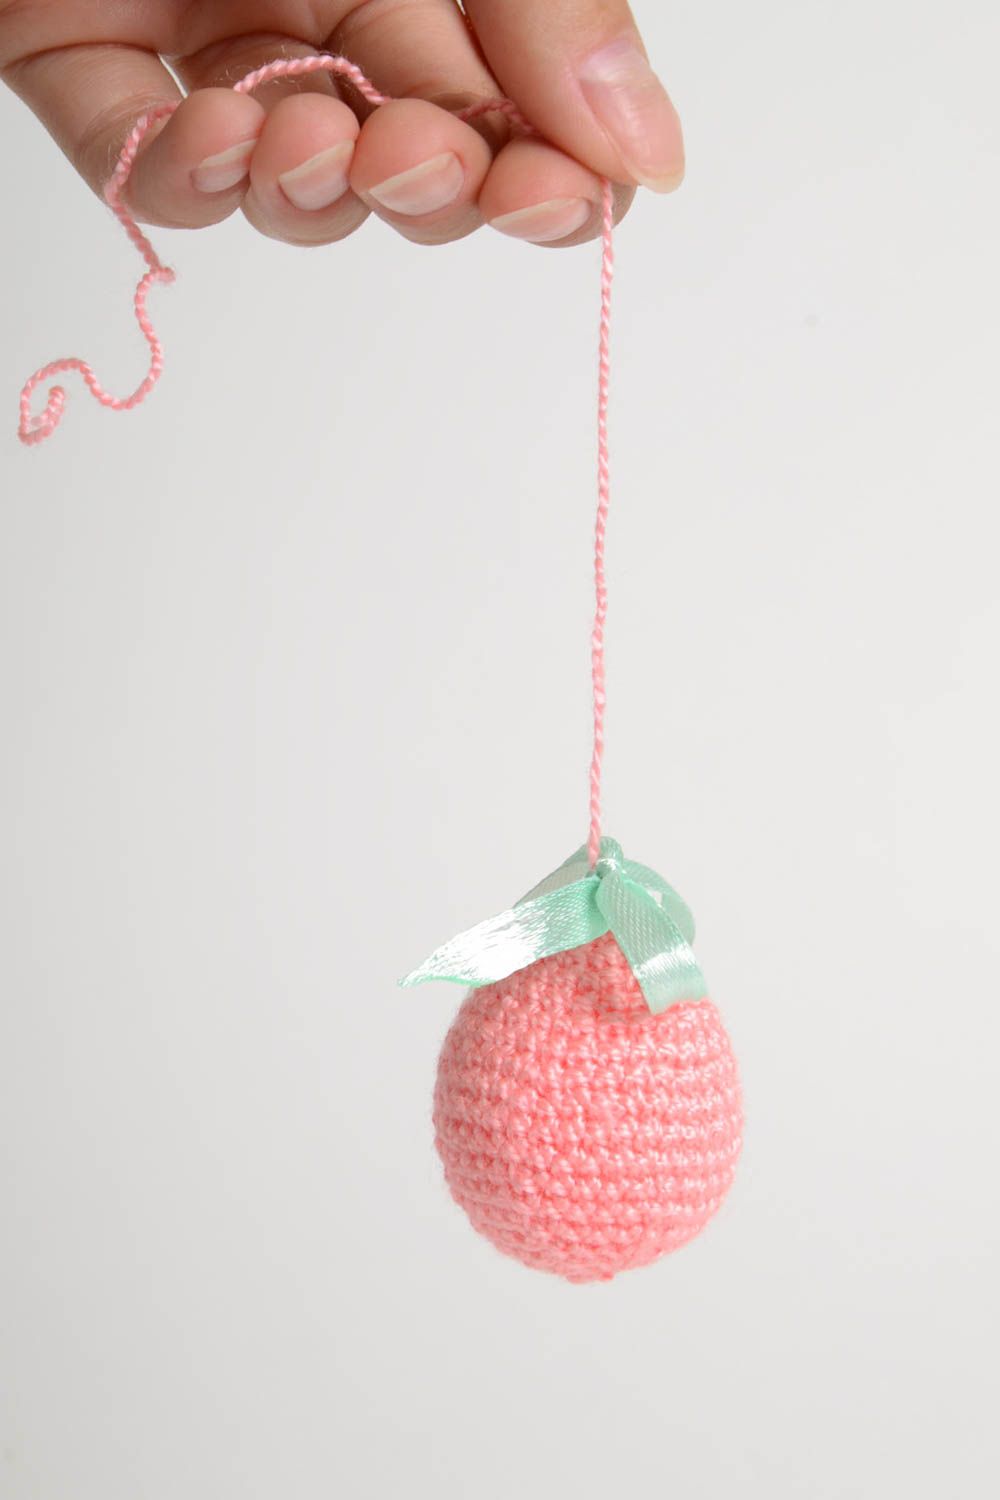 Unusual handmade Easter wall hanging crochet egg house and home gift ideas photo 5